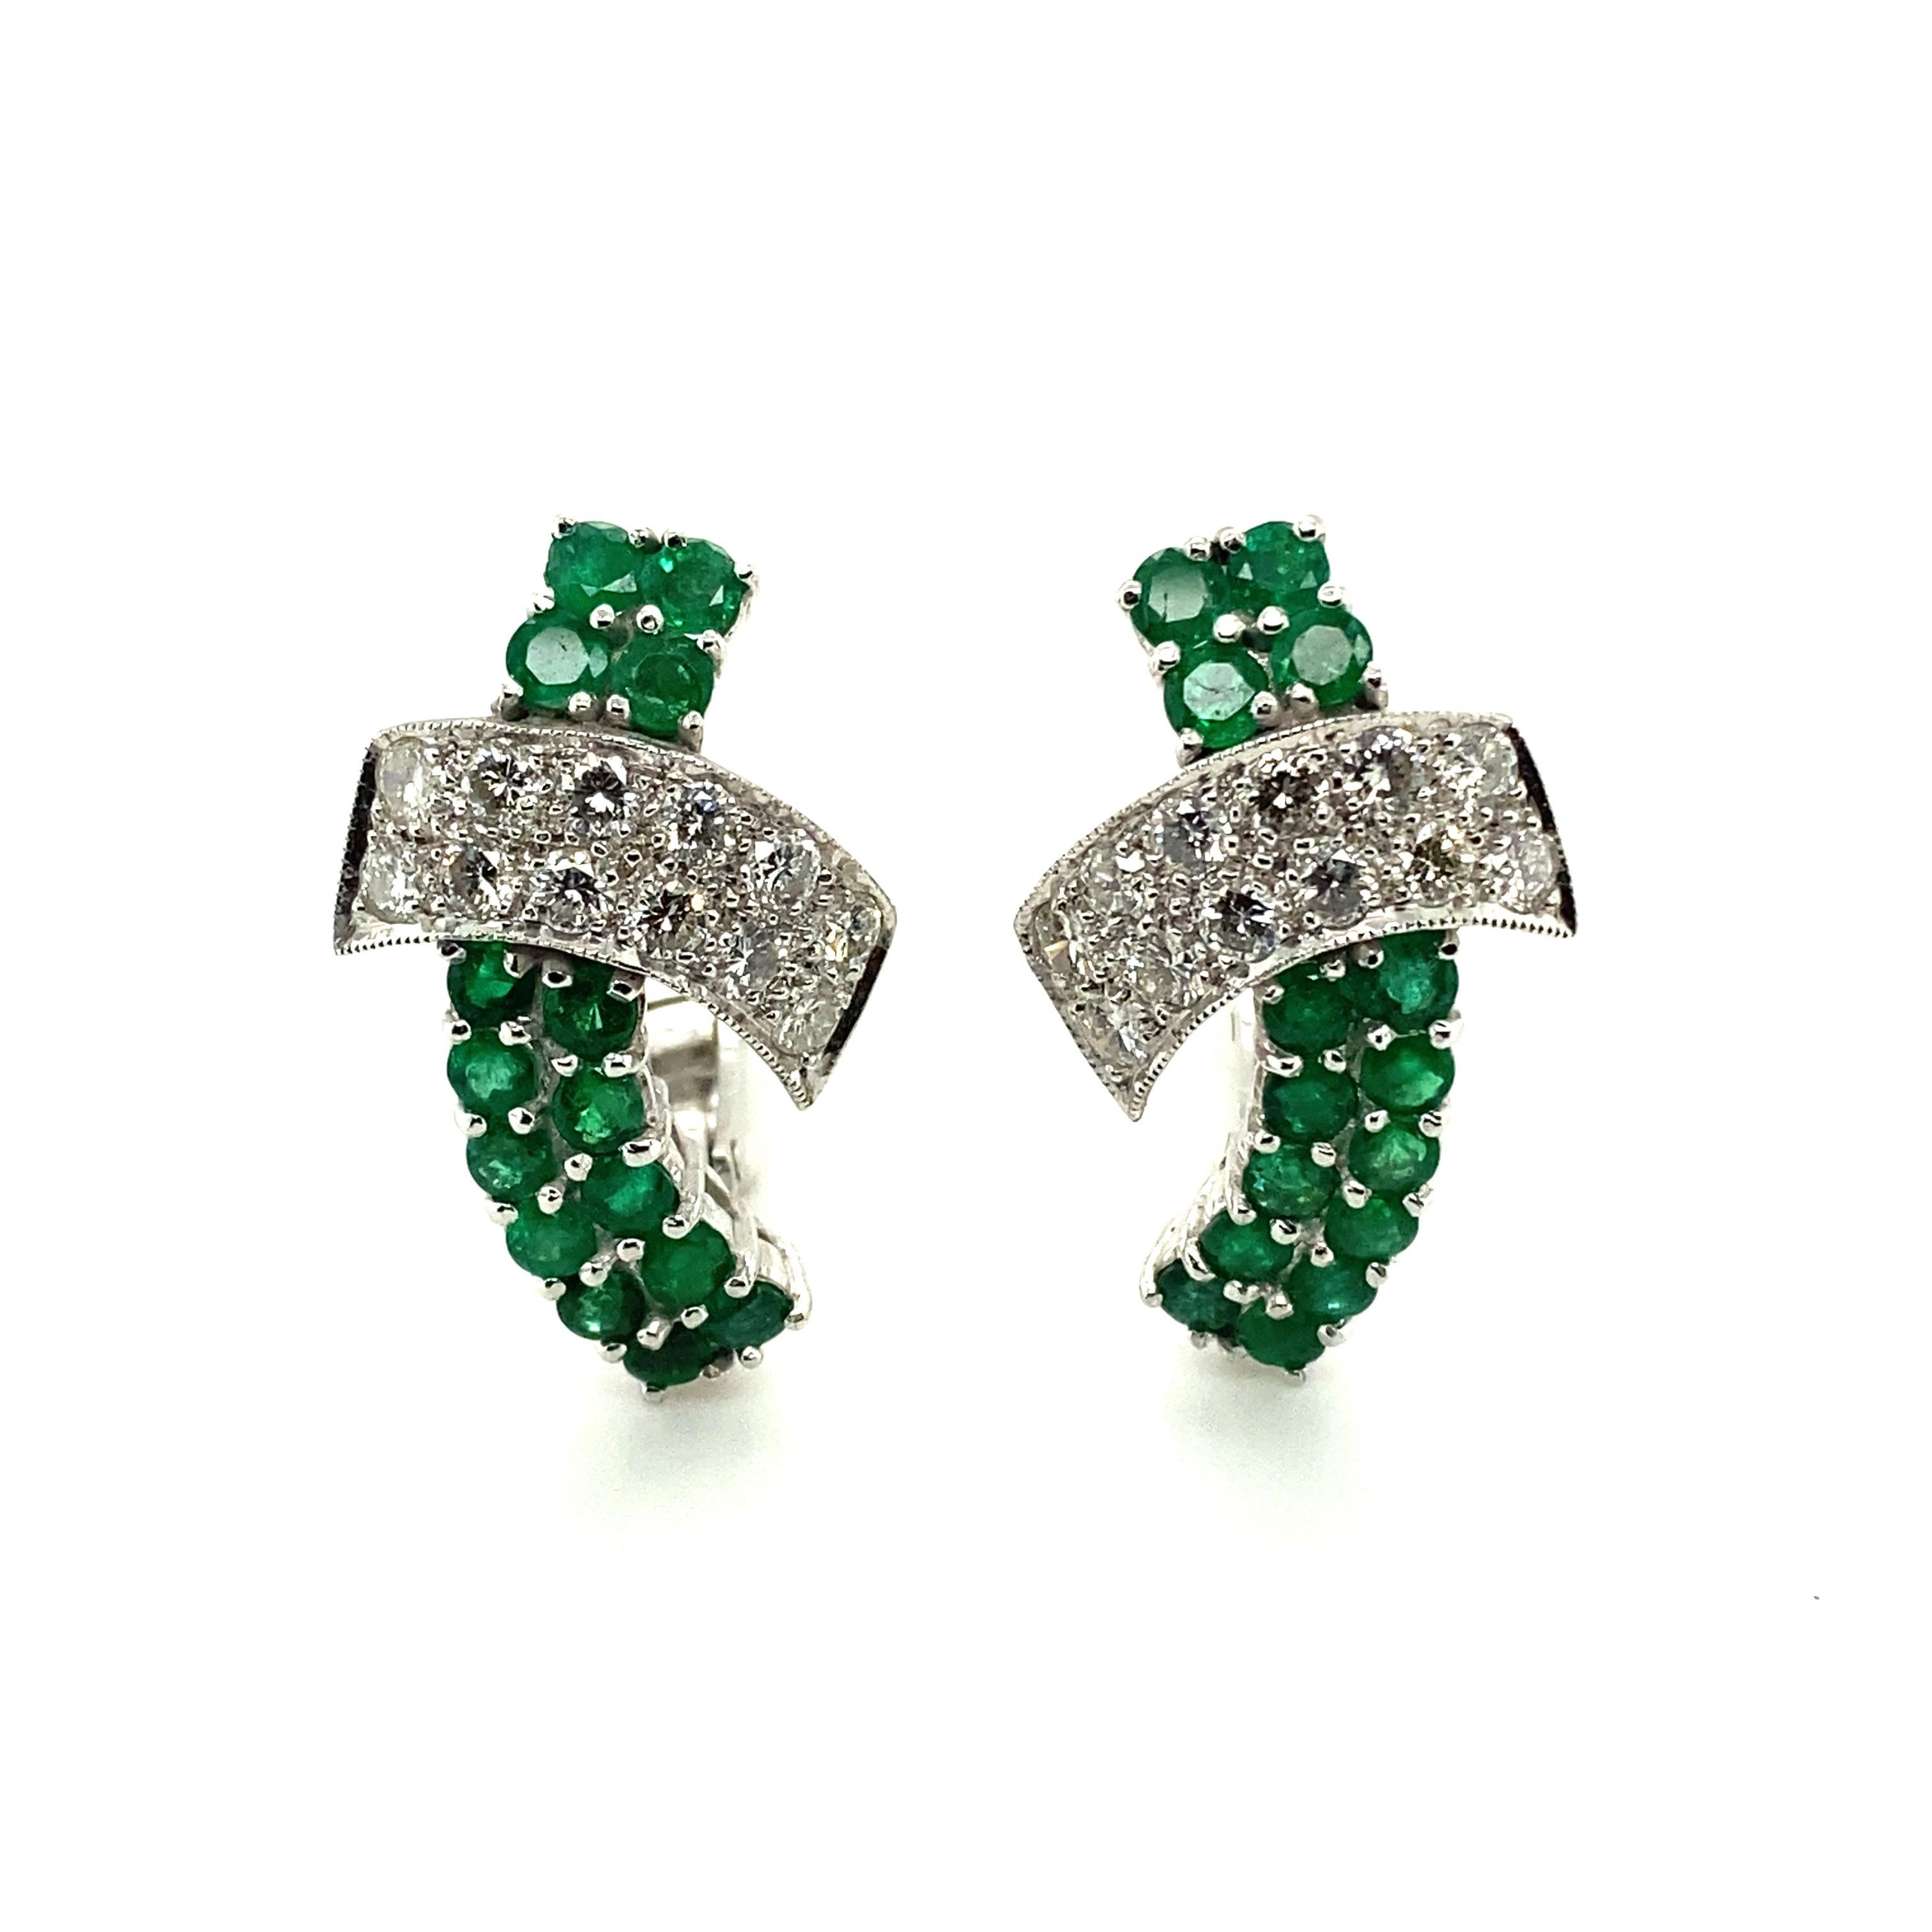 This pair of plafully t-shaped earclips in 18 karat white gold is set with 30 round-cut emeralds with a total weight of approximately 2.20 carats and 24 brilliant-cut diamonds of F/G colour and vs/si clarity with a total weight of approximately 1.44